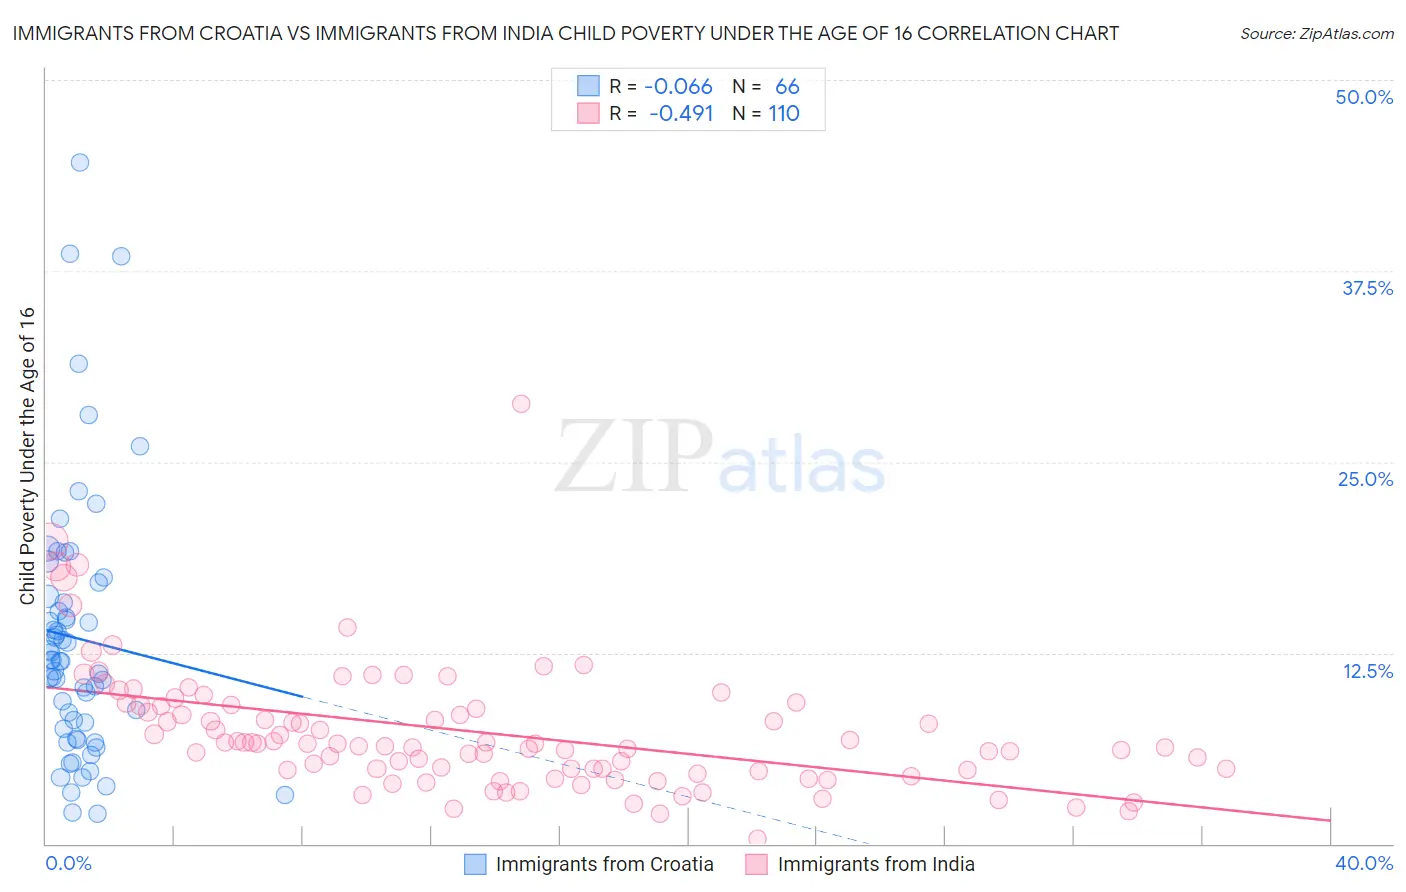 Immigrants from Croatia vs Immigrants from India Child Poverty Under the Age of 16